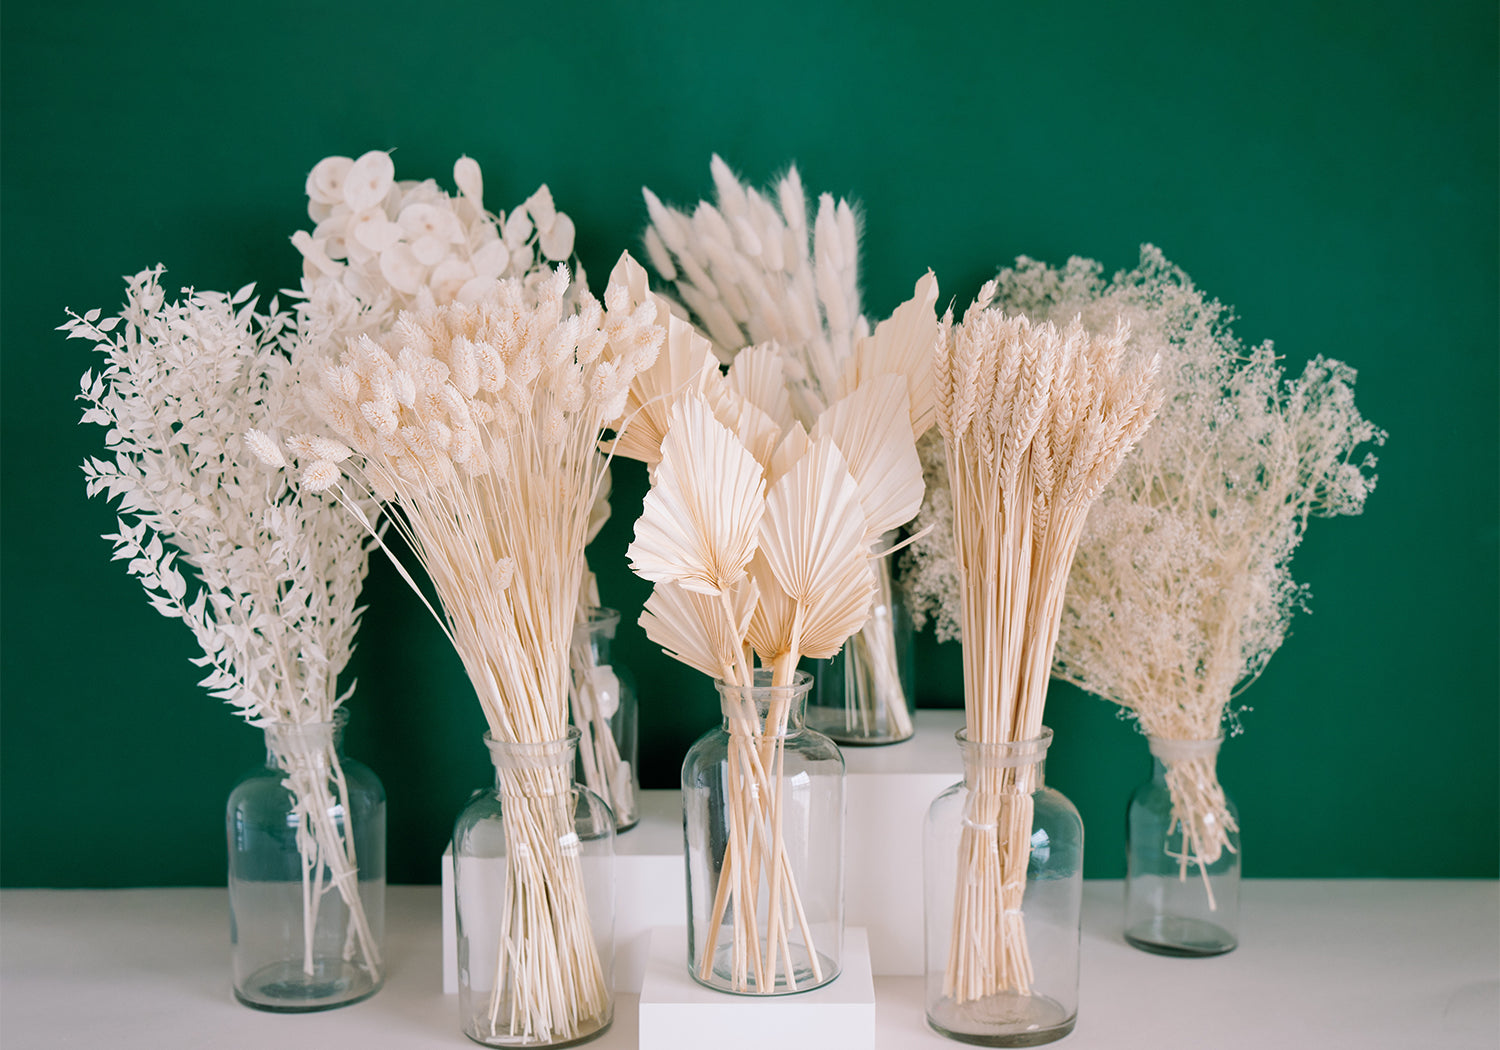 Wholesale flower bouquet accessories To Decorate Your Environment